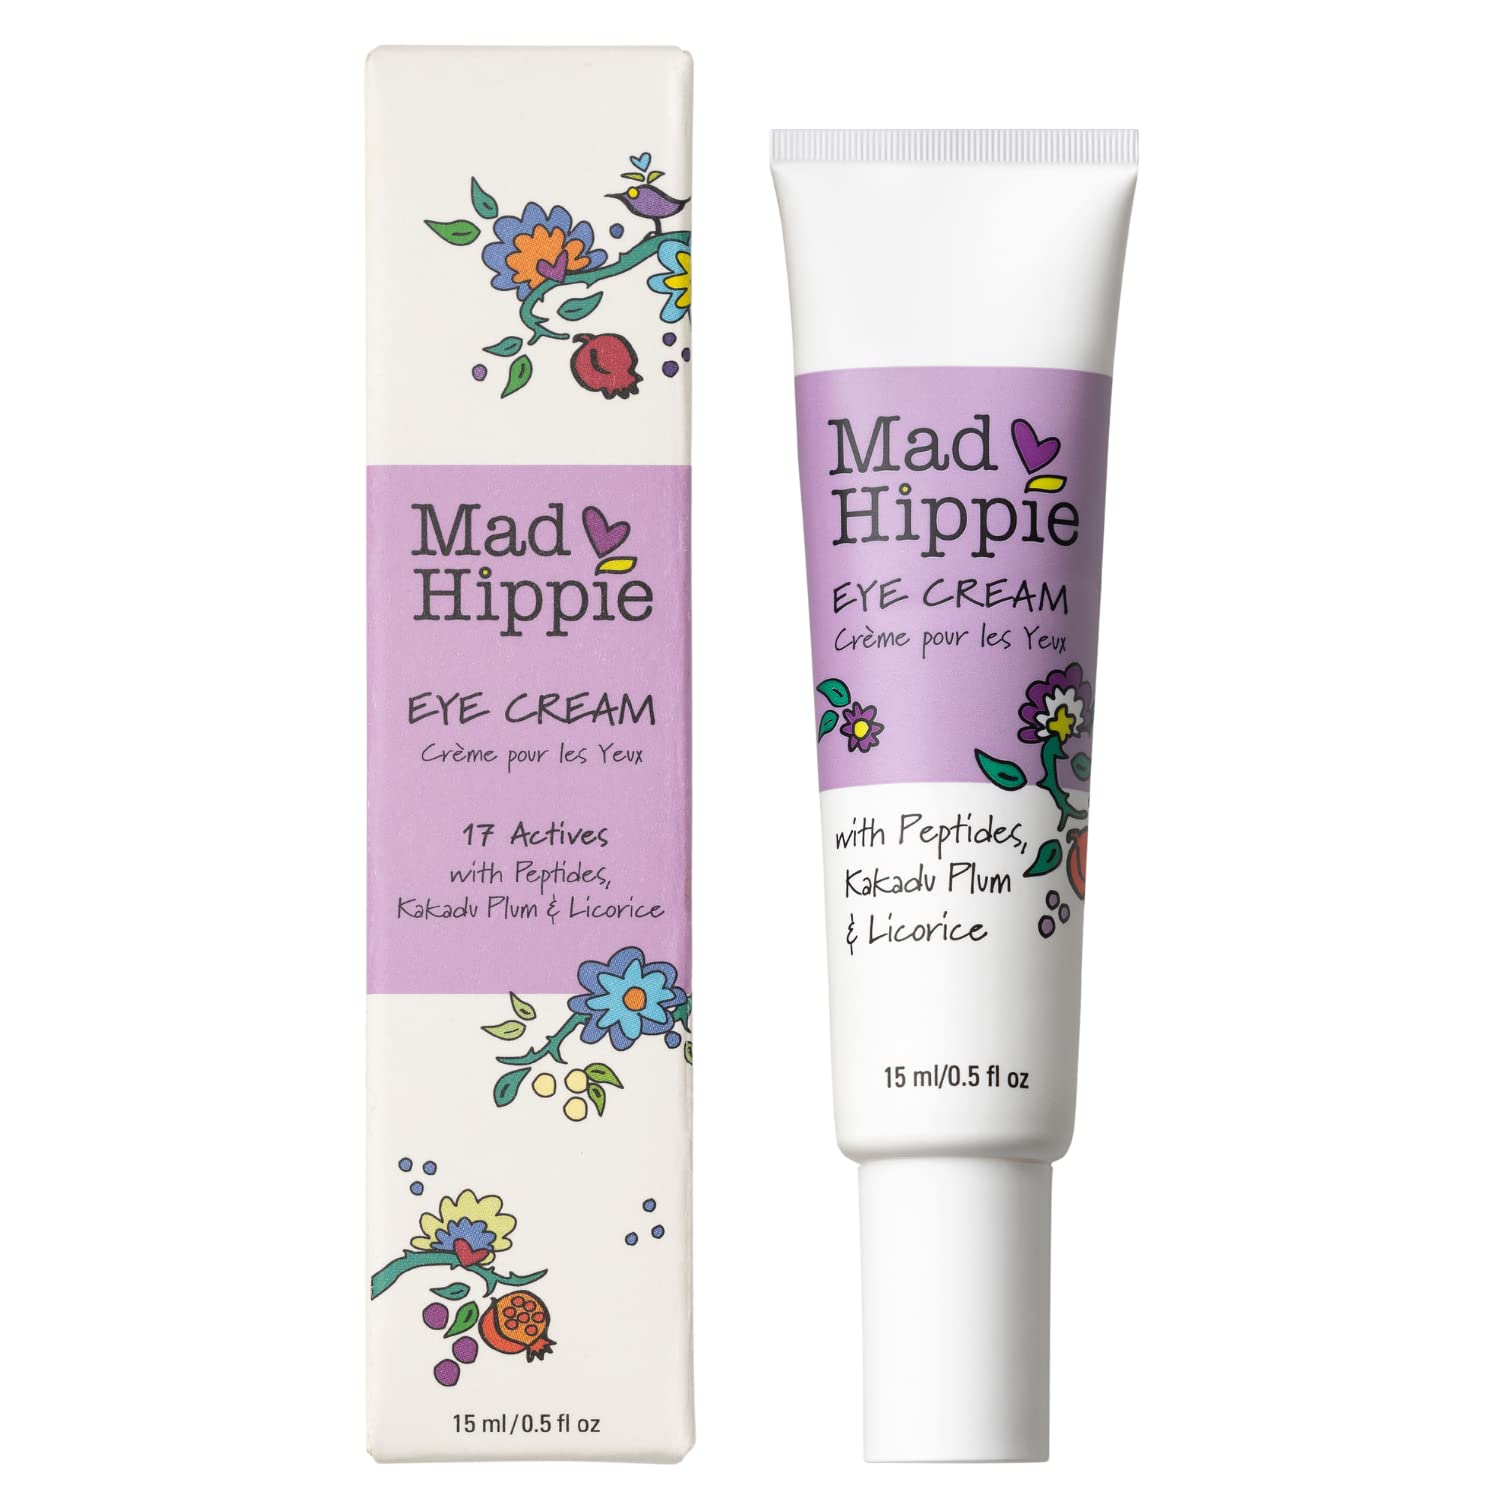 Mad Hippie Eye Cream - Anti-Aging Under Eye Cream for Dark Circles and Puffiness with Niacinamide, with Skin-Brightening Vitamin C, 0.5